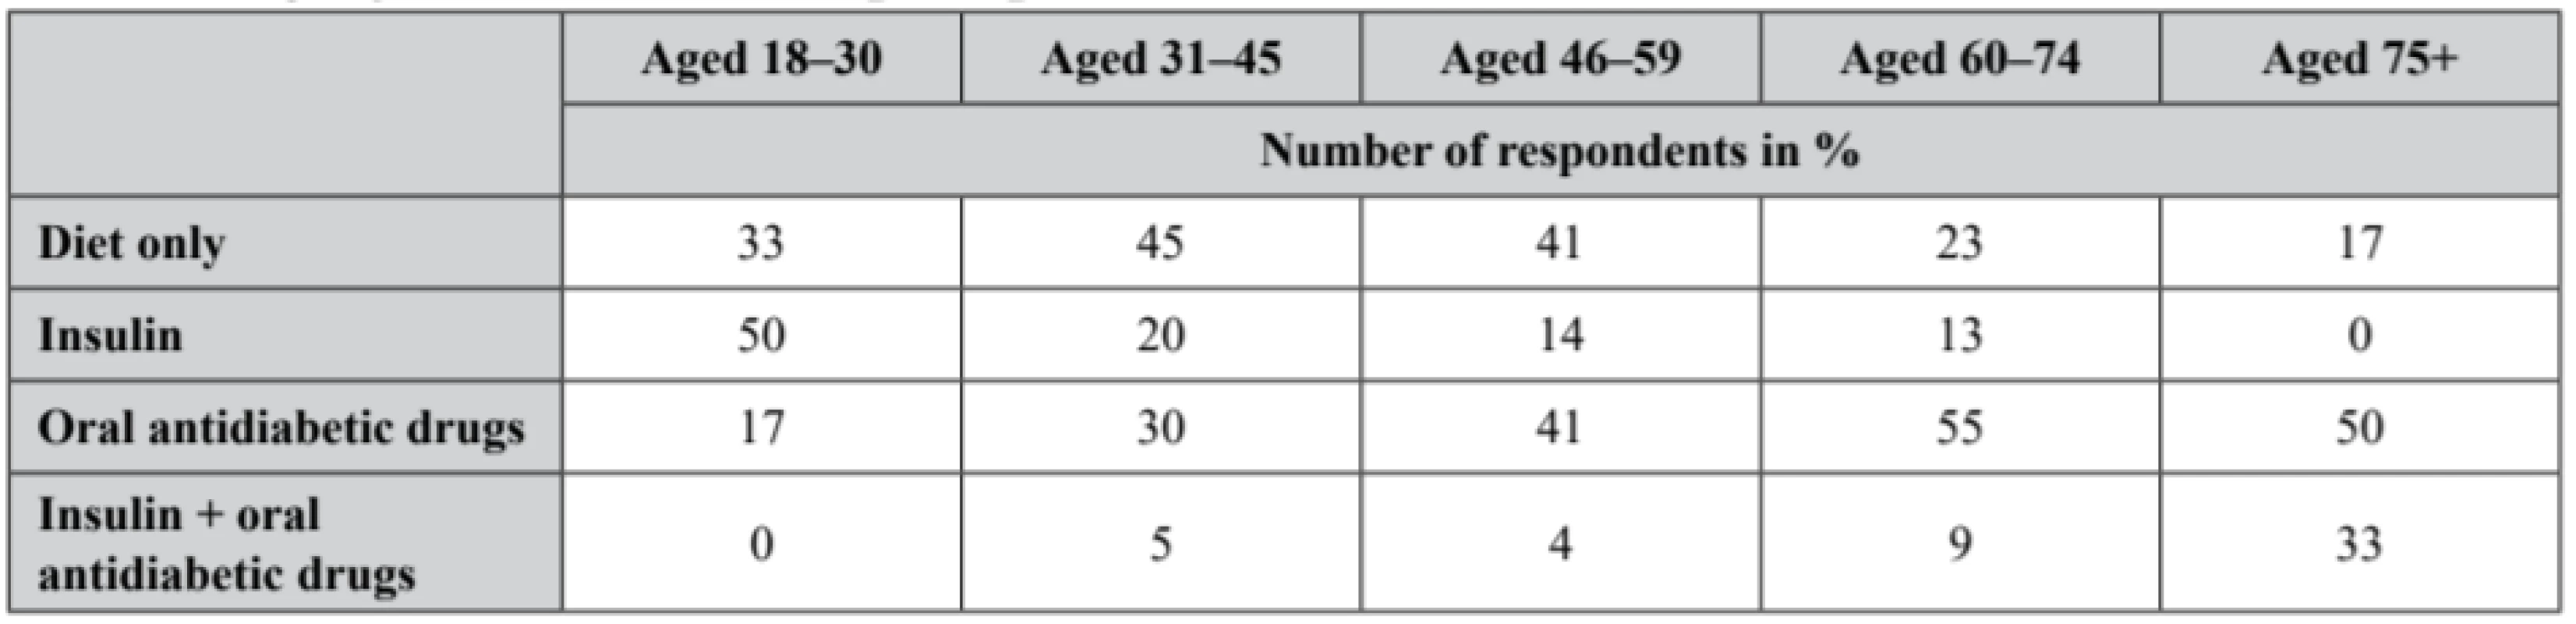 Therapies for diabetes mellitus in age categories